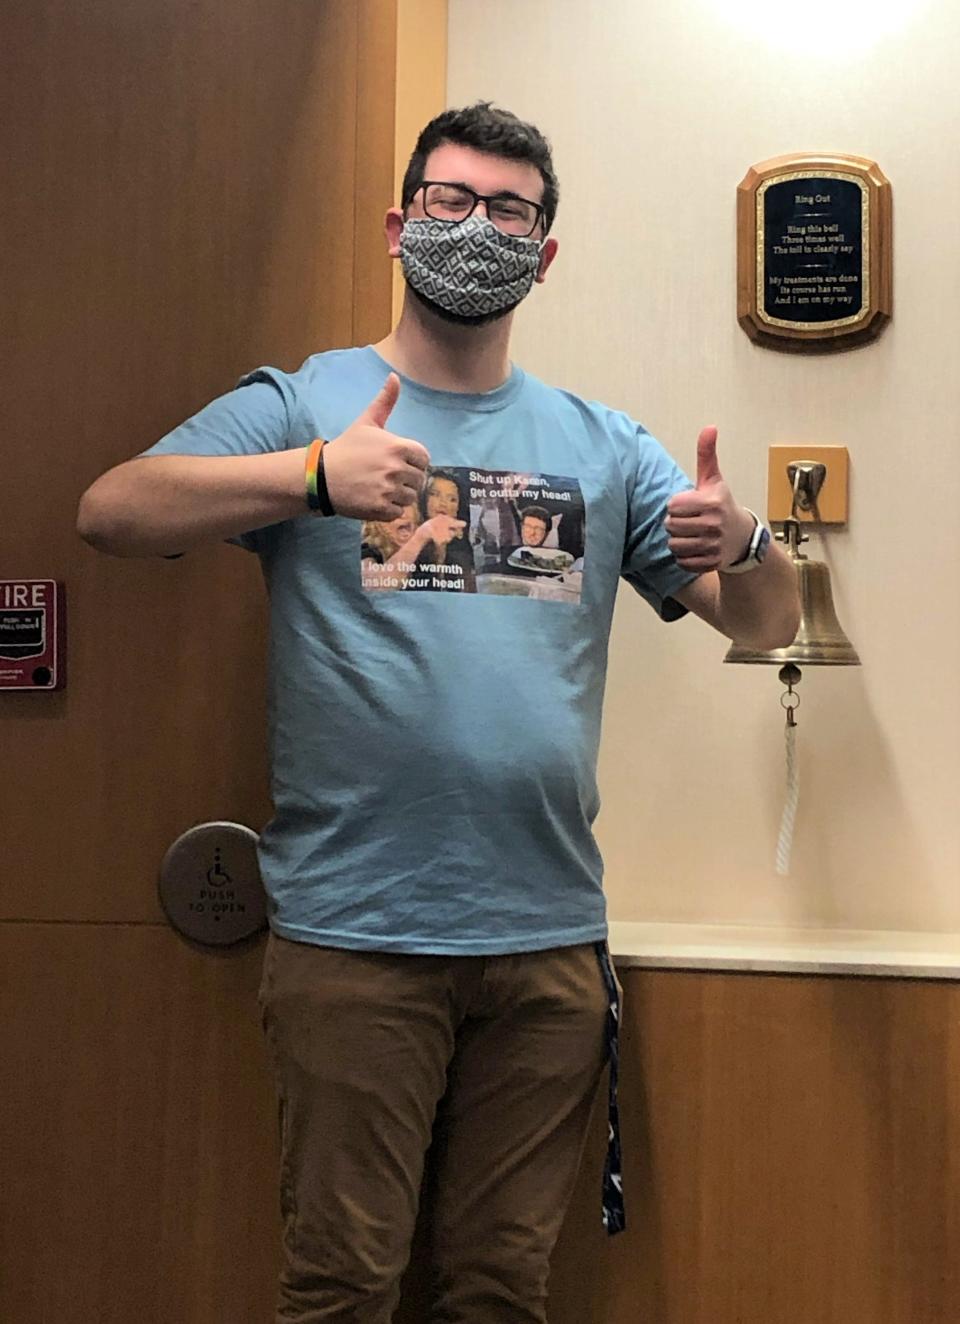 Eddie Stuczynski, a Neenah High School graduate who was diagnosed with myxoid chondrosarcoma in 2020, had his final treatment Jan. 13, 2021.